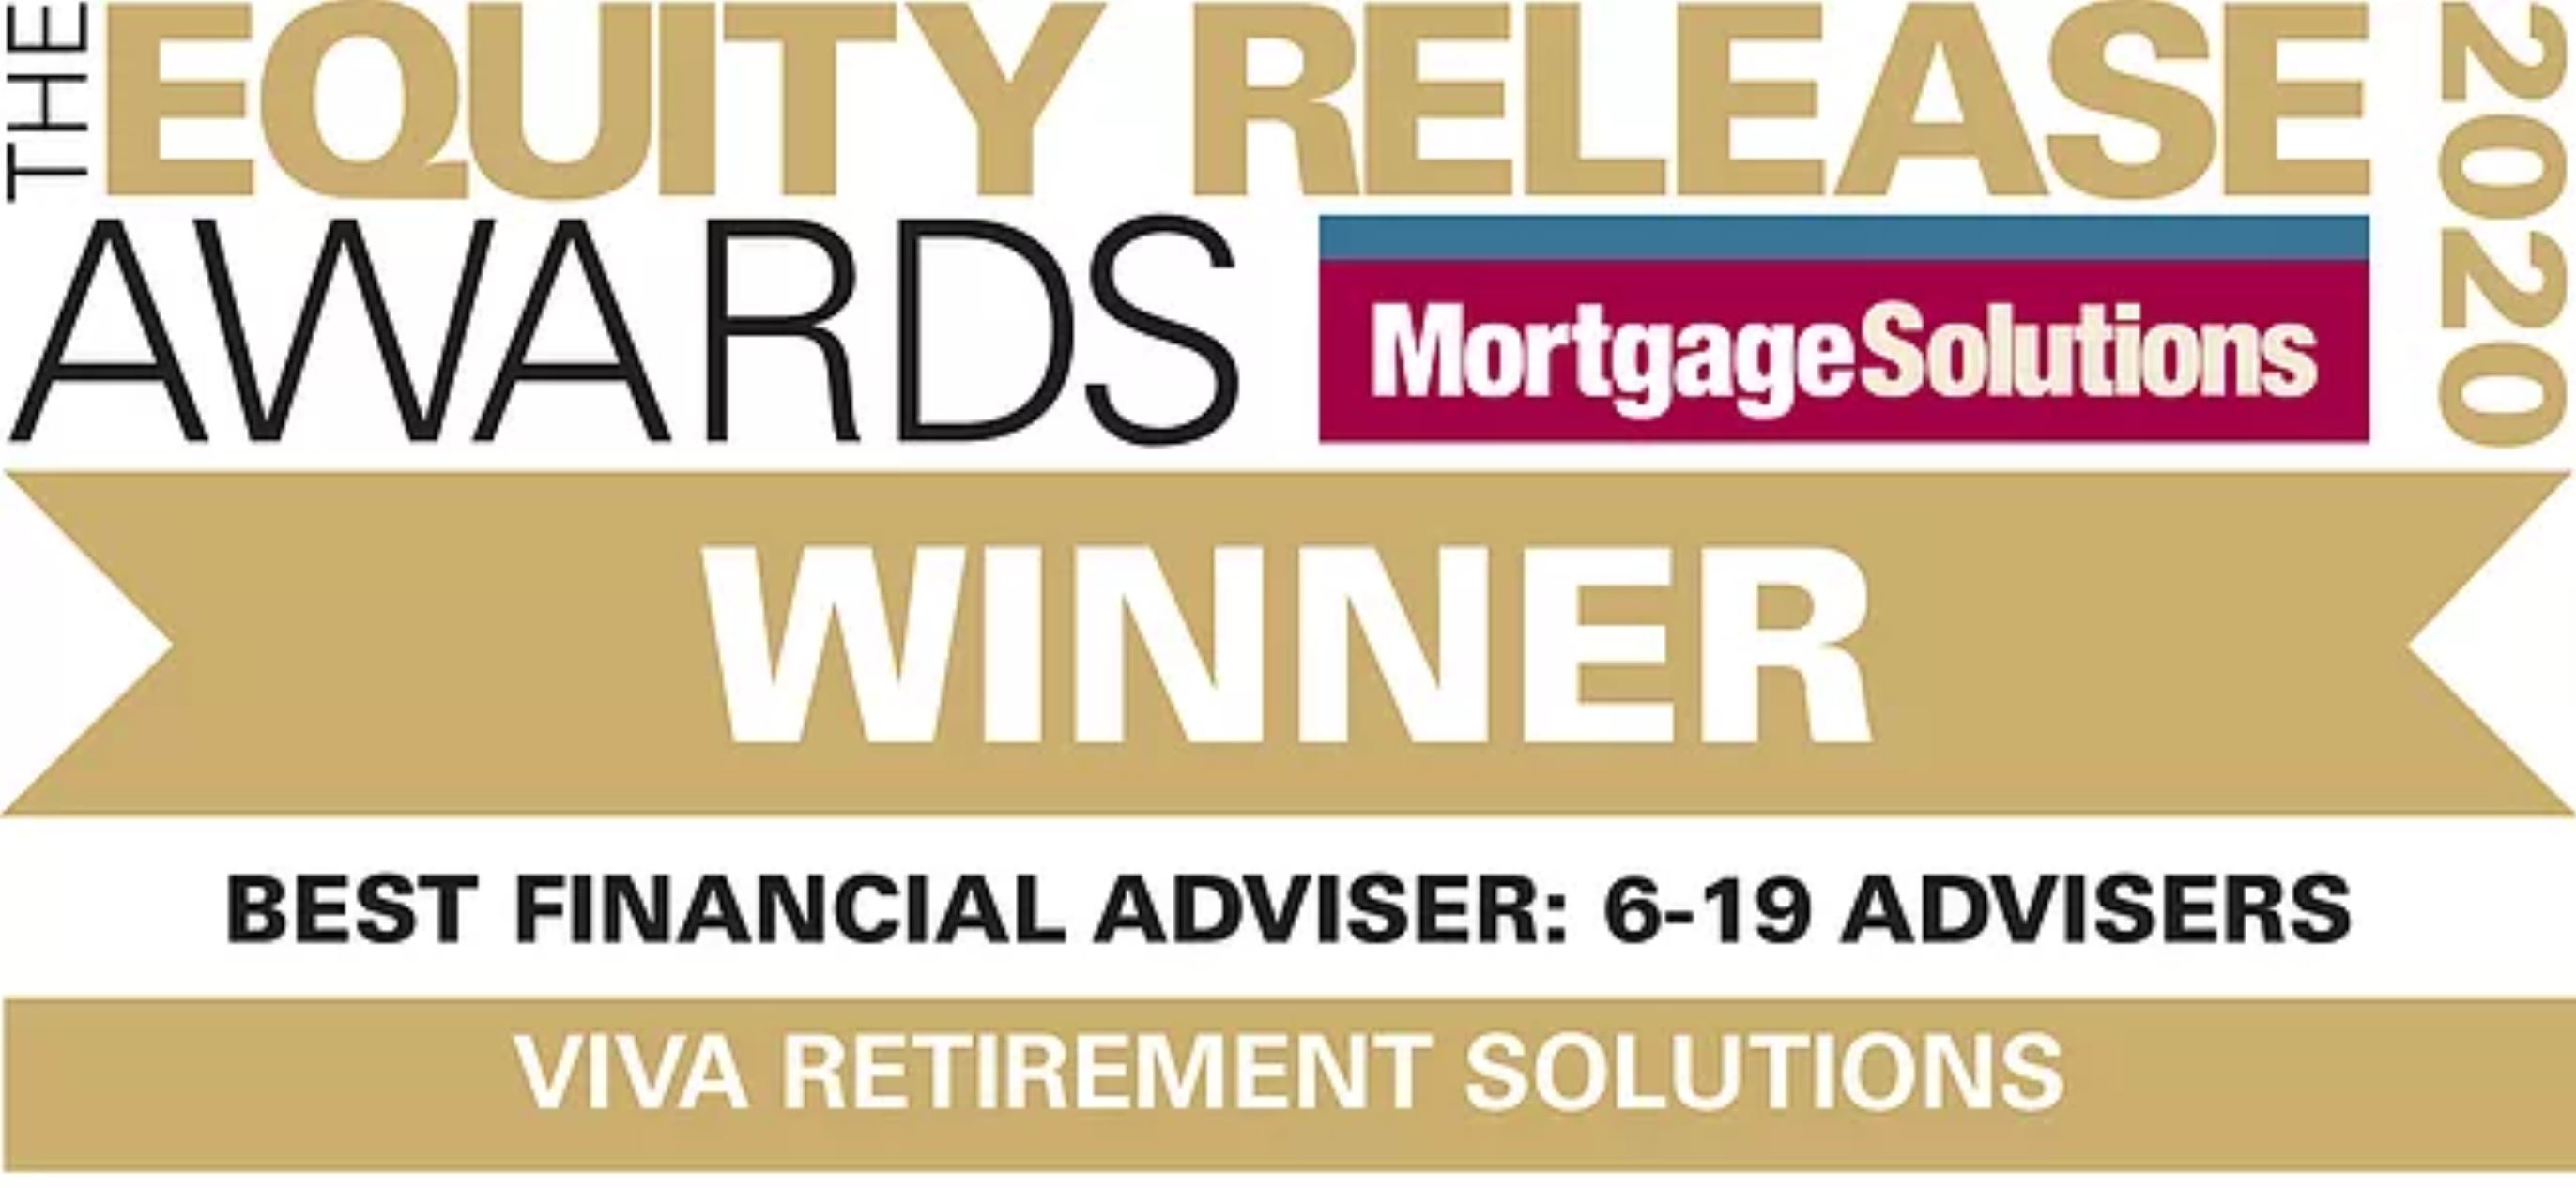 equity release adviser for property values with no monthly repayments